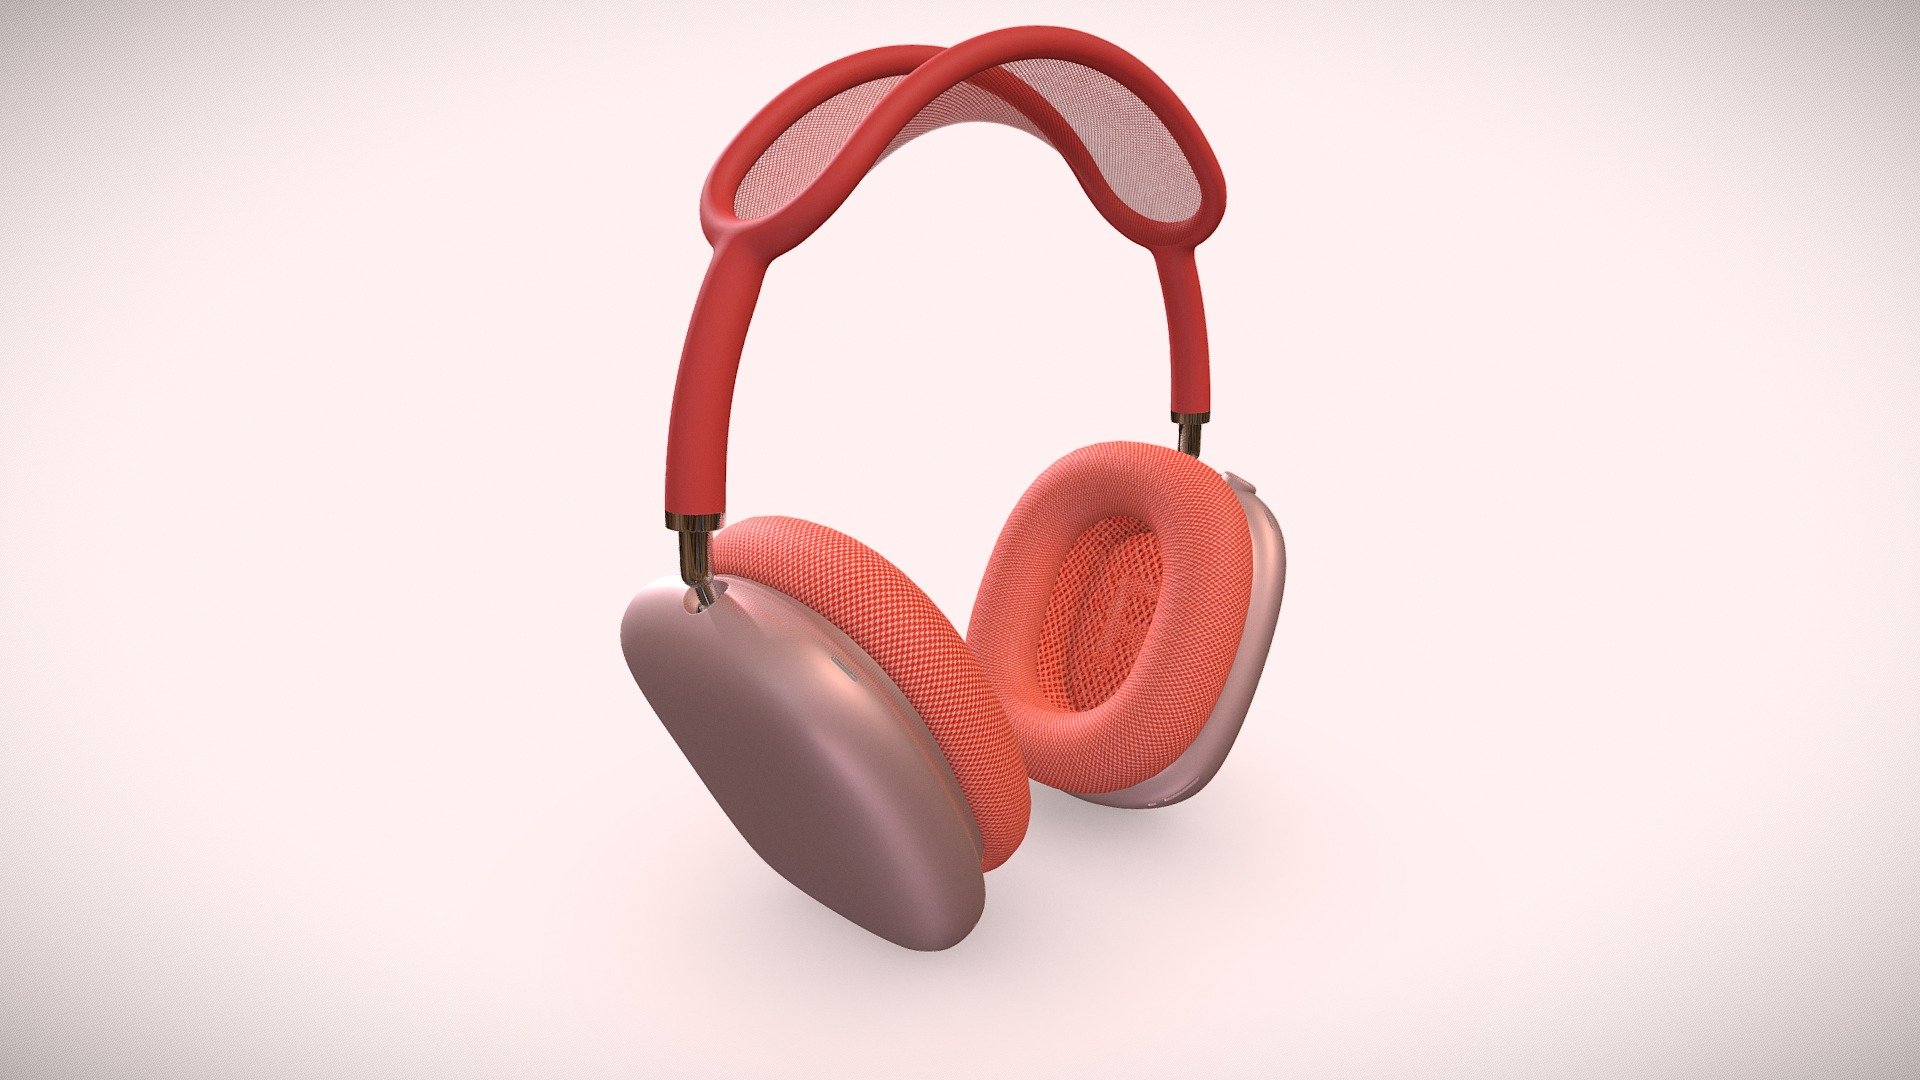 Get professional realistic 3D renderings at an industry bottom rate for your products (like headphones, Shoes etc)  and boost your business by beating every competition with ease. With our premium rendering service, you get




Outstanding 3D Product Rendering

All in one Real Estate 3D Design Solutions

High-Resolution Realistic 3D Rendering

Conact Us: https://themotiontree.com/contact-us/ - AirPods Max Pink Headphone - 3D model by The Motion Tree (@themotiontree) 3d model